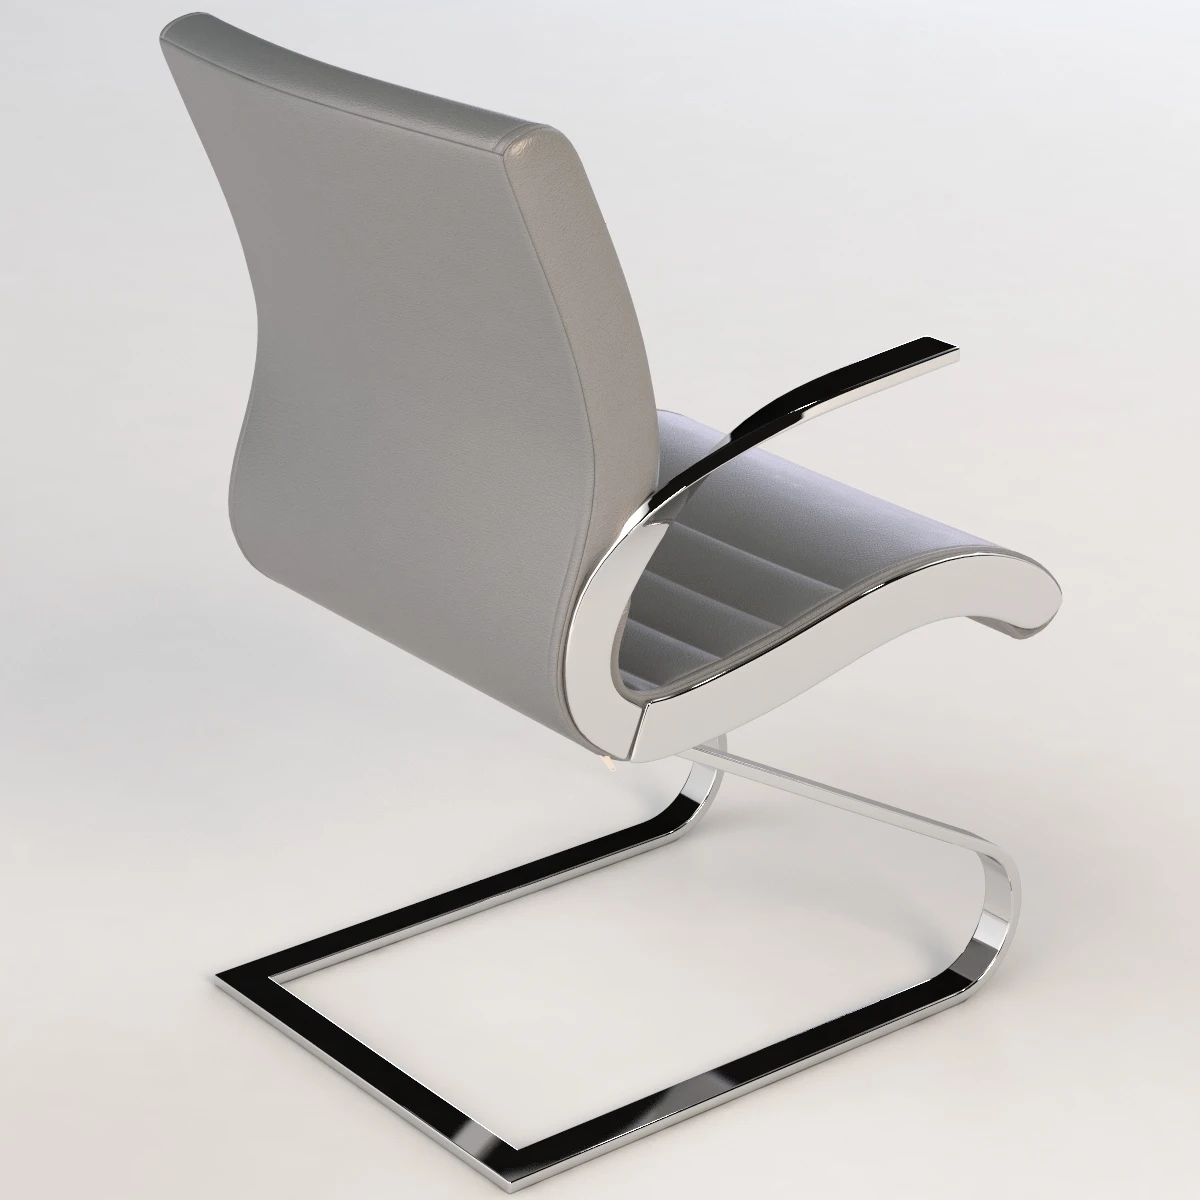 Luxy Synchrony Cantilever Upholstered Chair By Stefano Getzel 3D Model_03